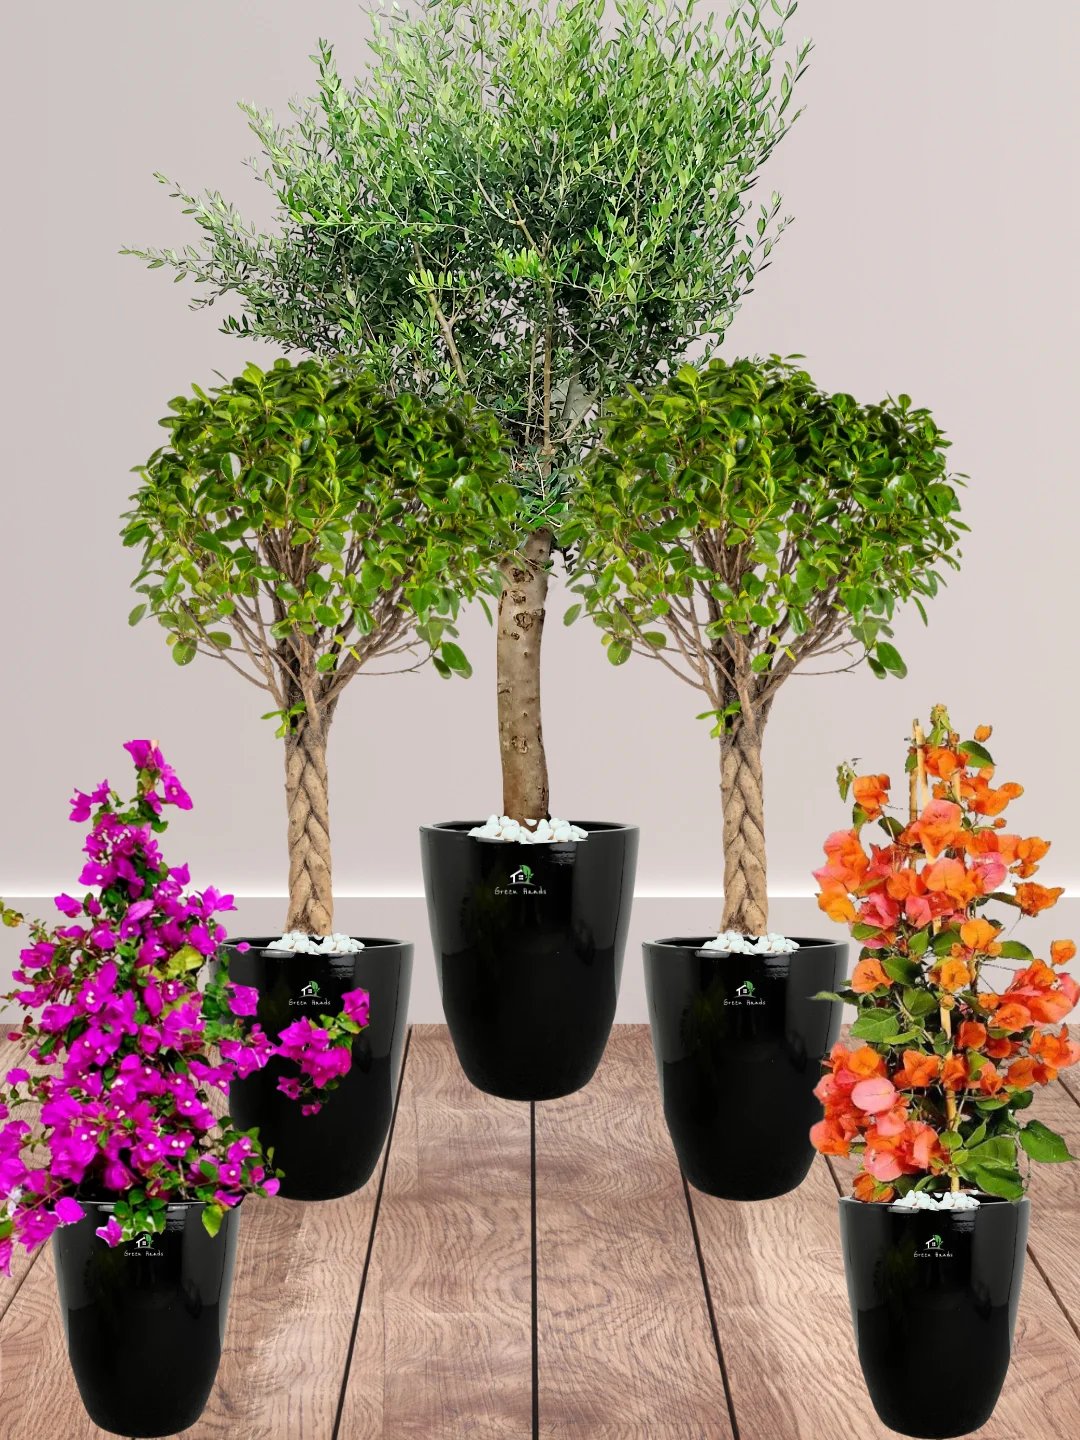 Outdoor Potted Plants